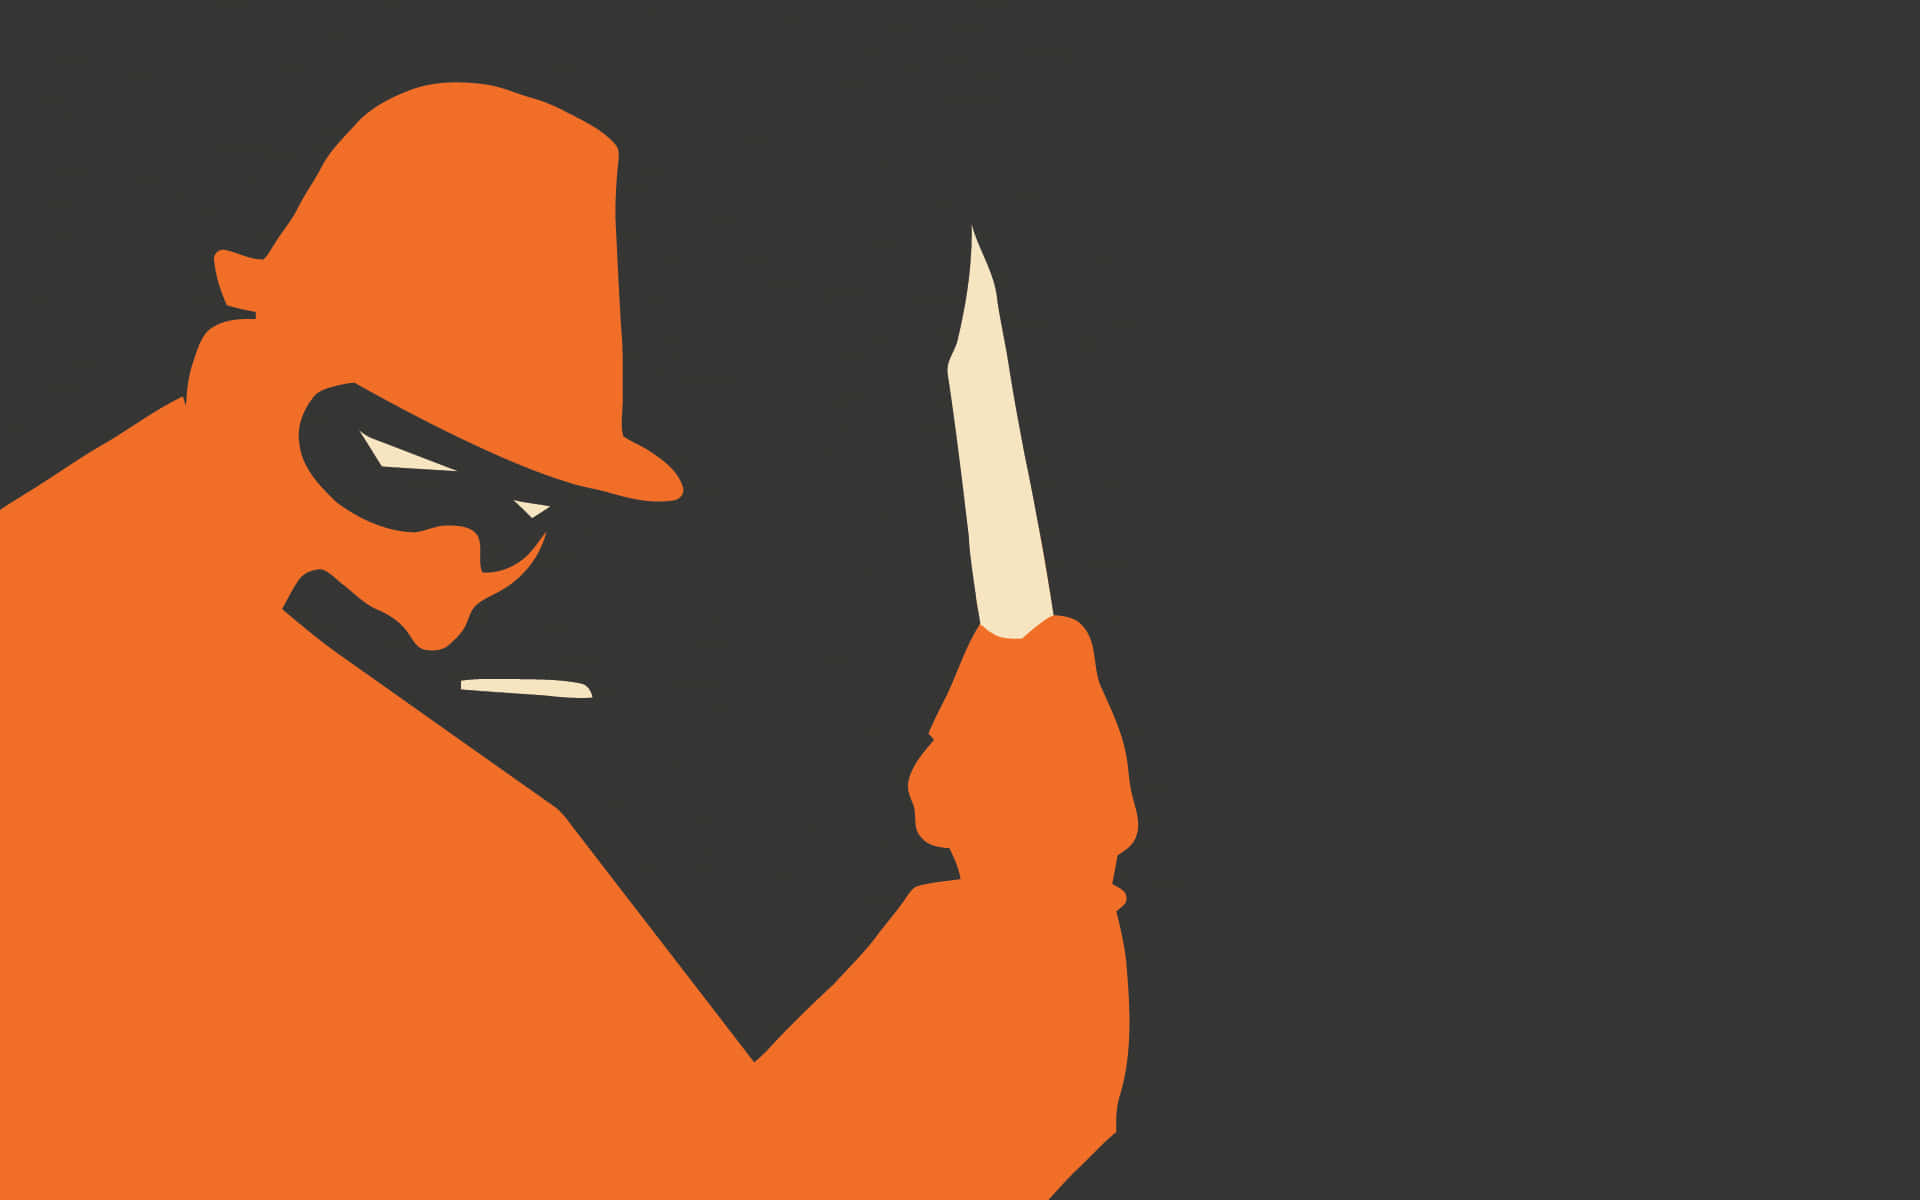 A Man In Orange With A Knife